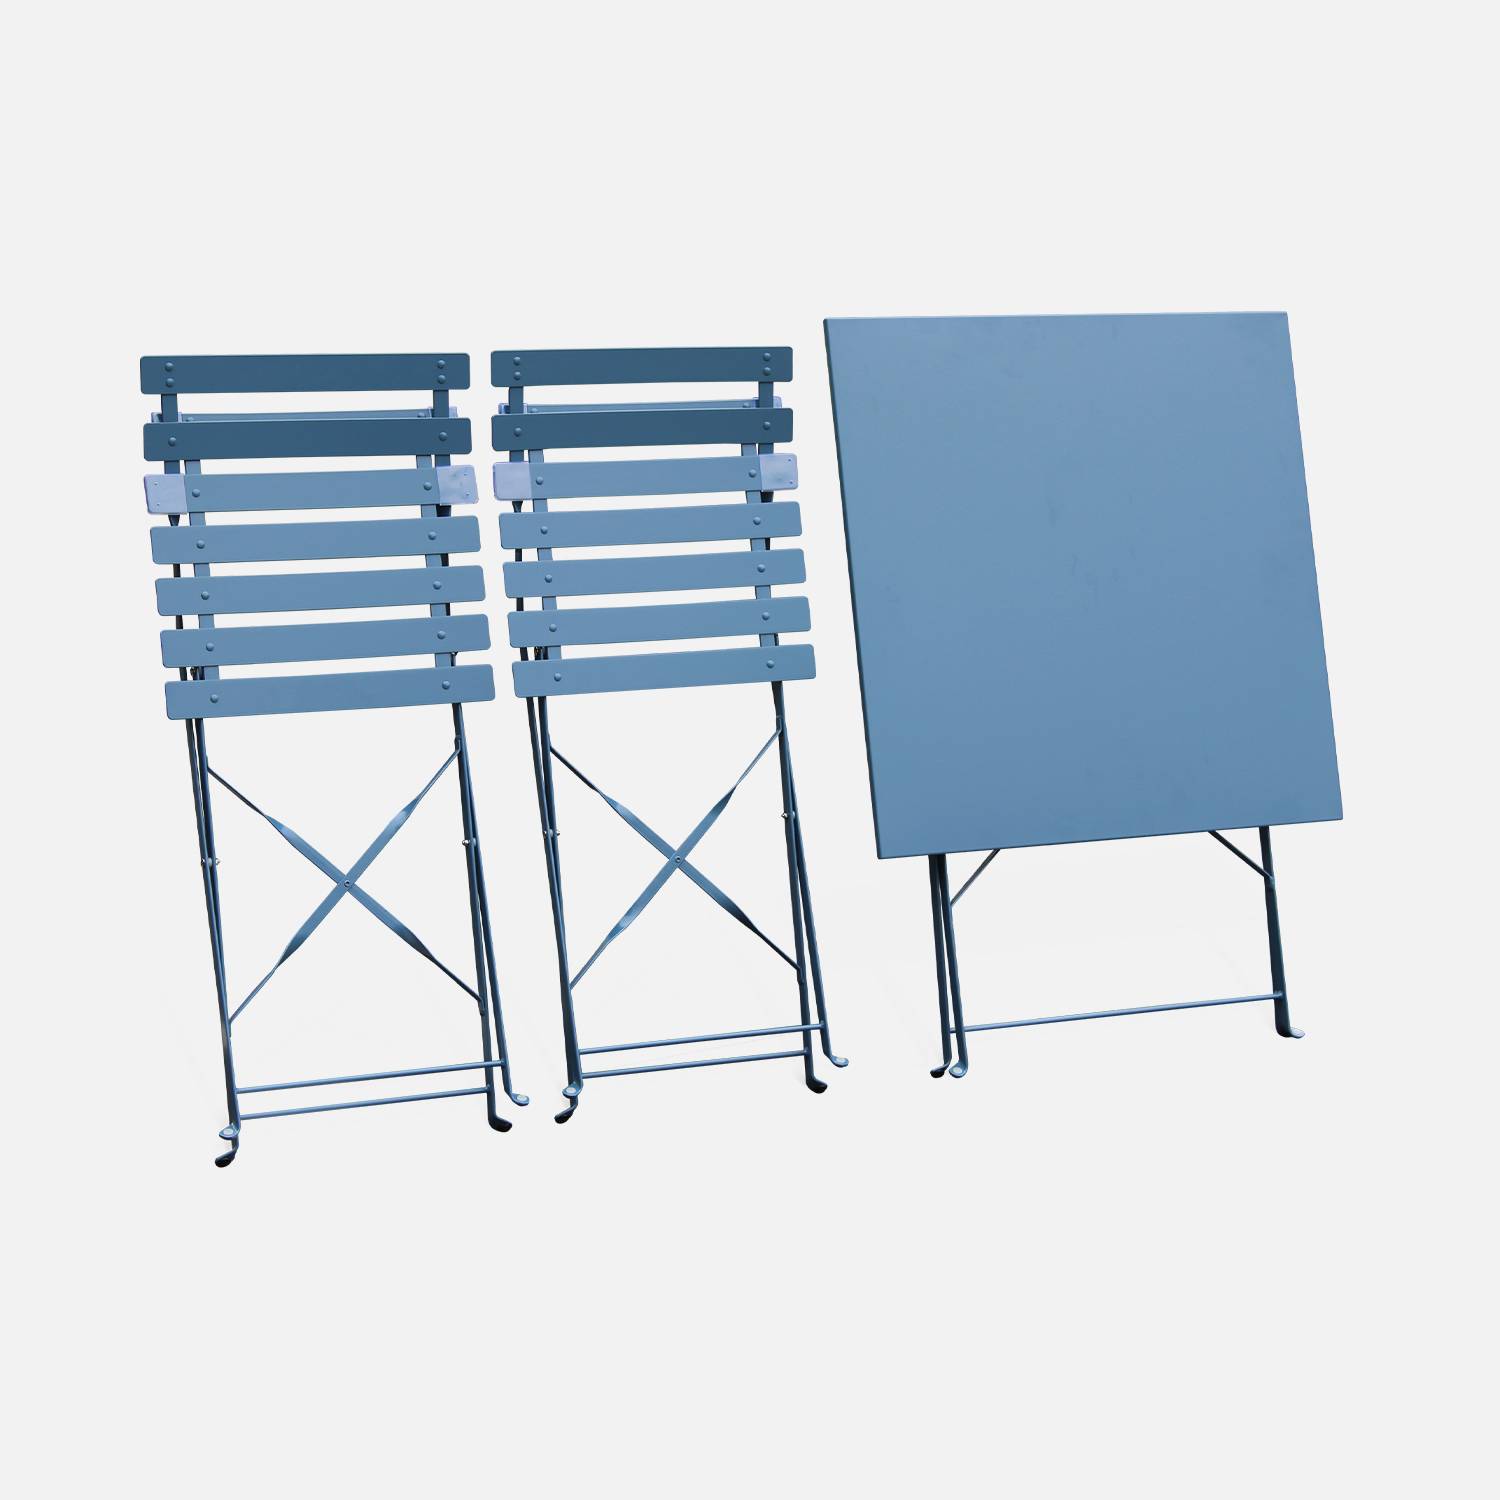 2-seater foldable thermo-lacquered steel bistro garden table with chairs, 70x70cm - Emilia - Grey Blue Photo6